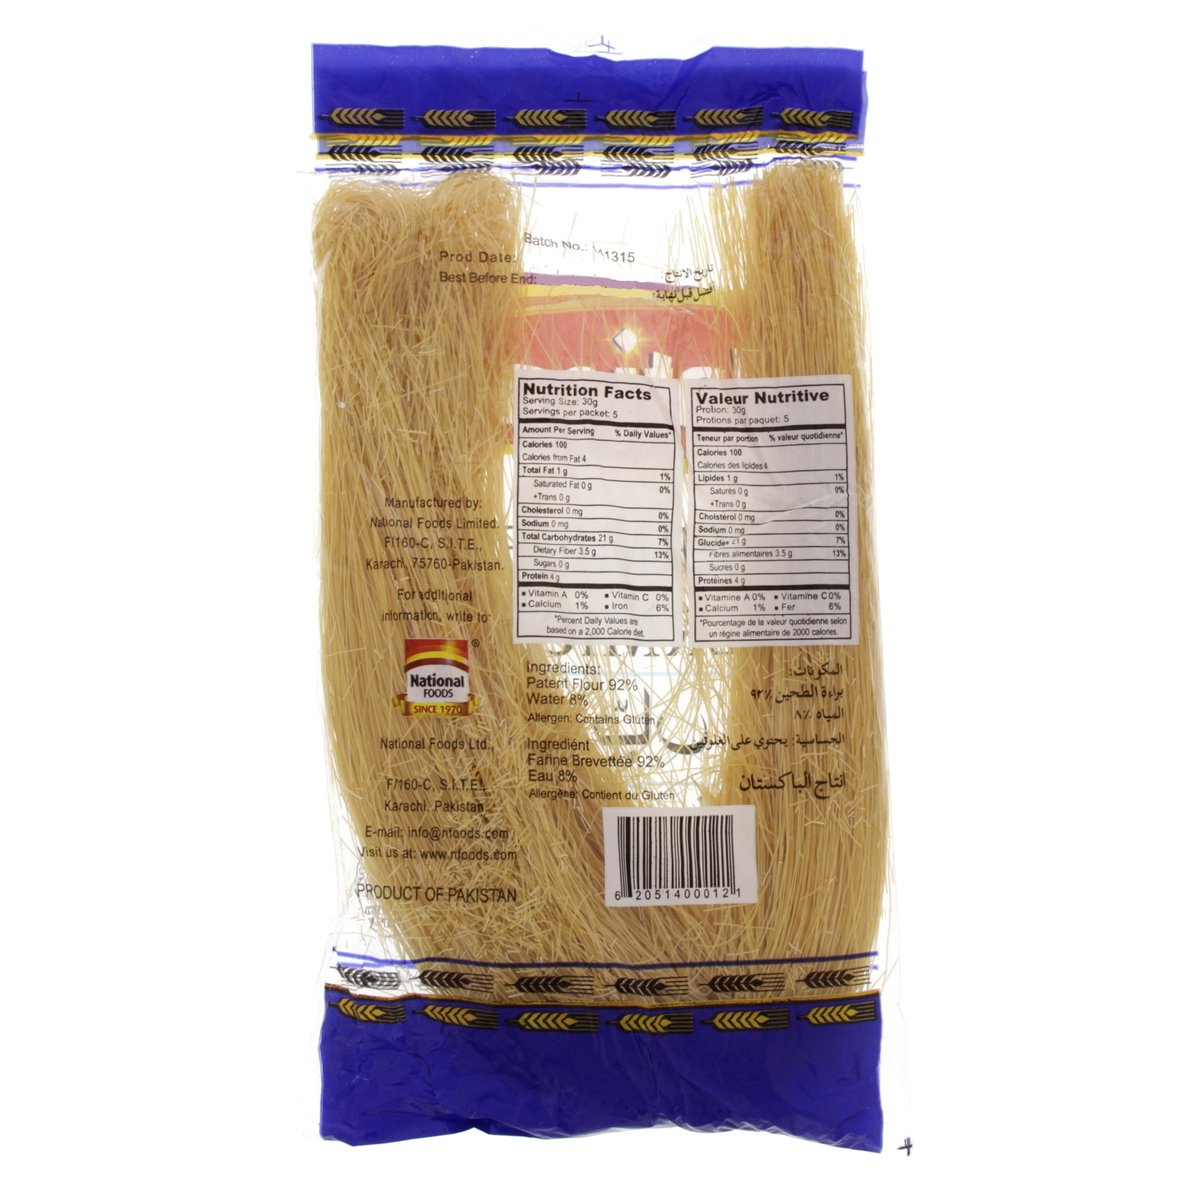 National Vermicelli 150 g